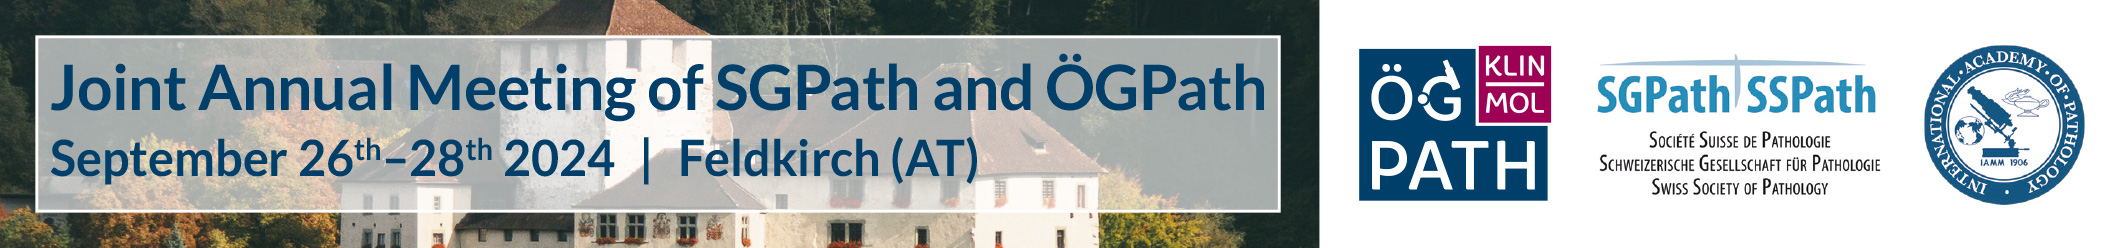 Joint Annual Meeting of SGPath and ÖGPath 2024